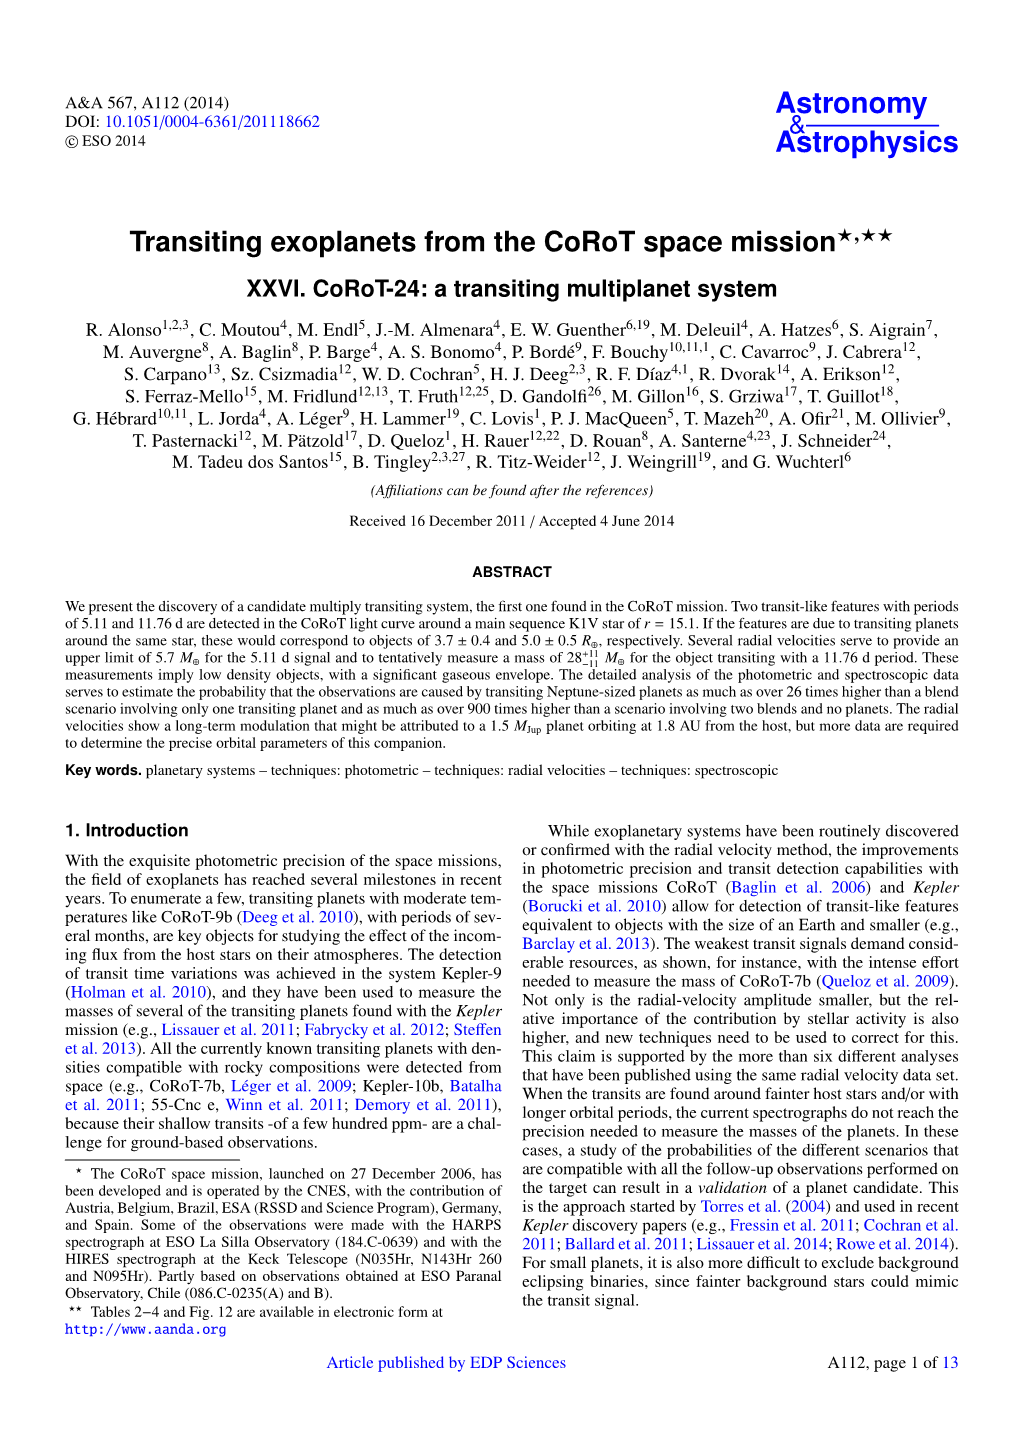 Transiting Exoplanets from the Corot Space Mission⋆⋆⋆